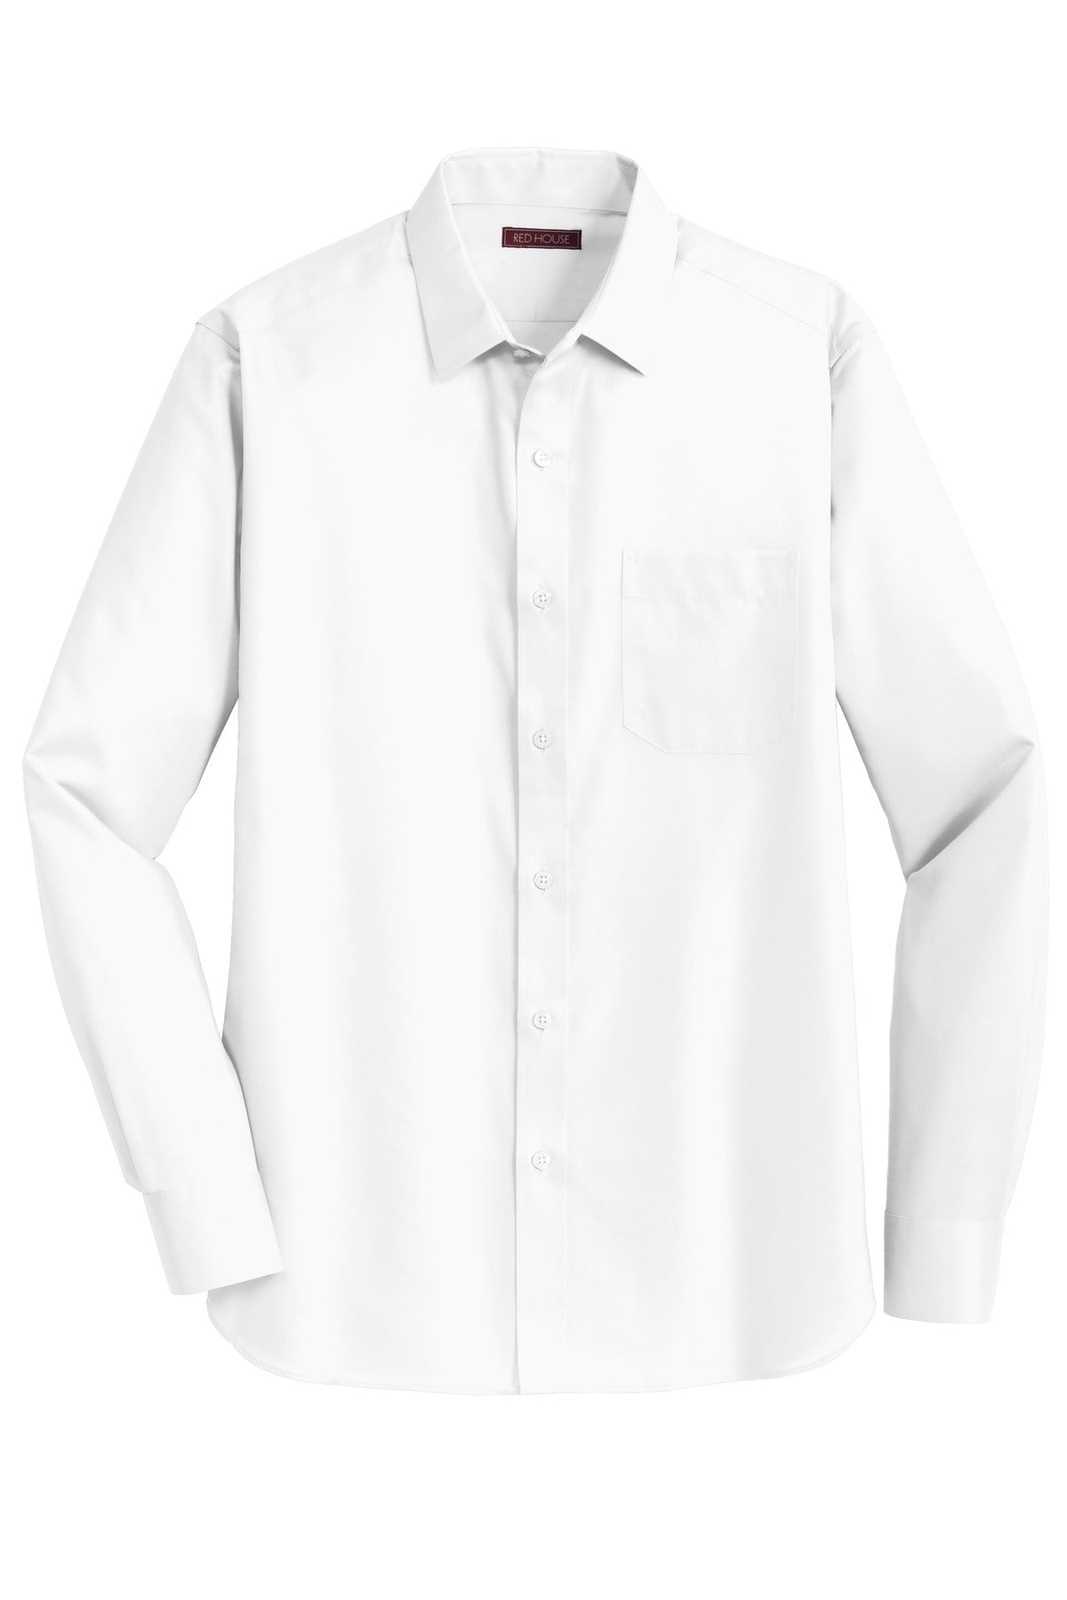 Red House RH80 Slim Fit Non-Iron Twill Shirt - White - HIT a Double - 5